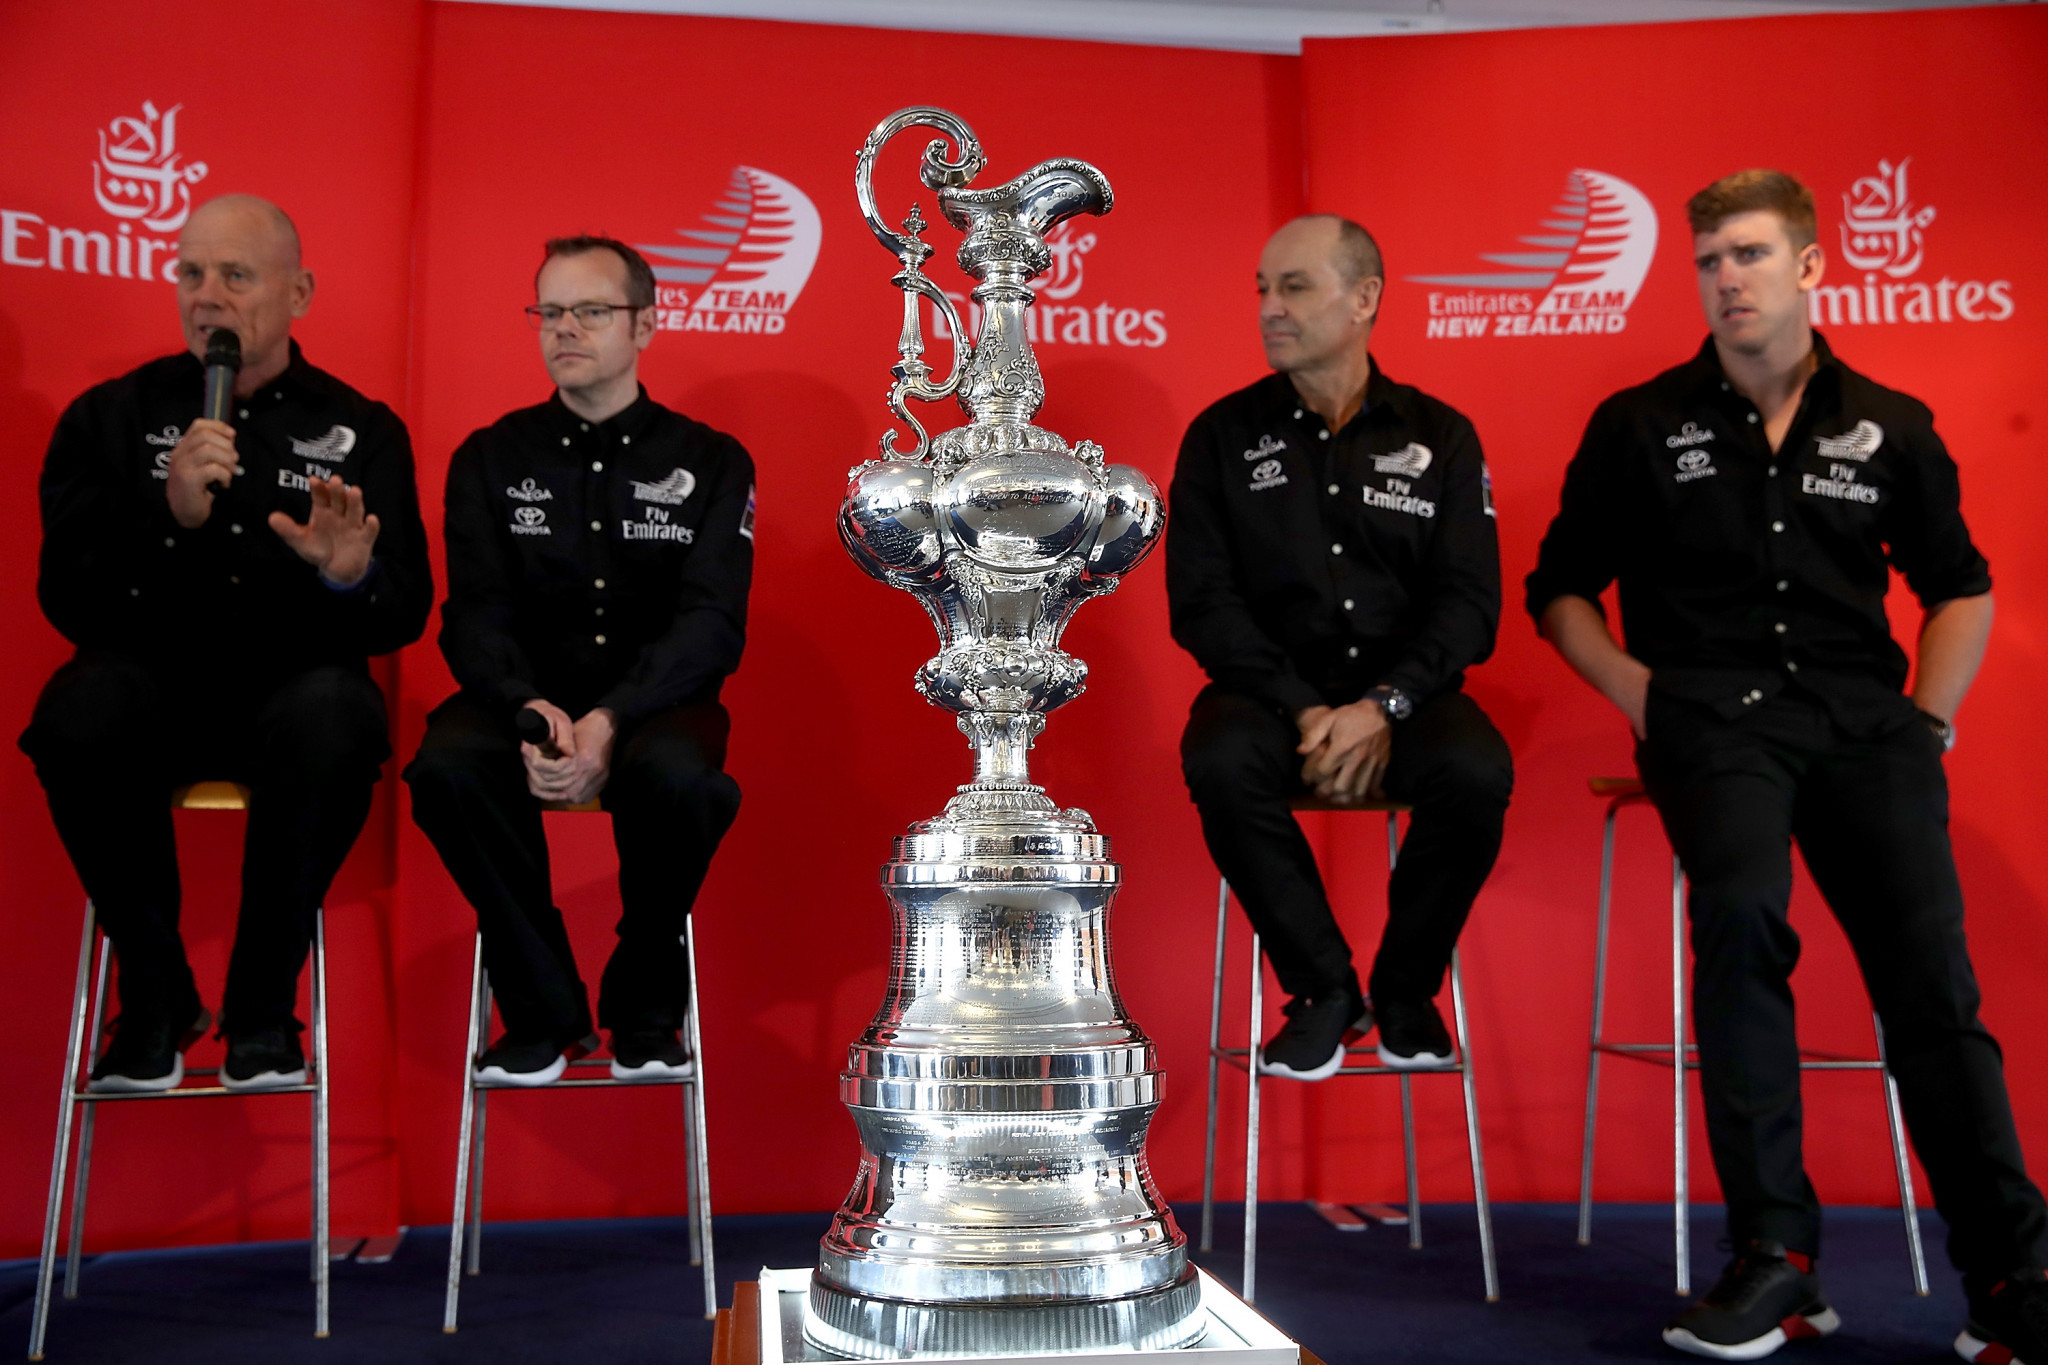 Auckland confirmed as hosts of 2021 America's Cup